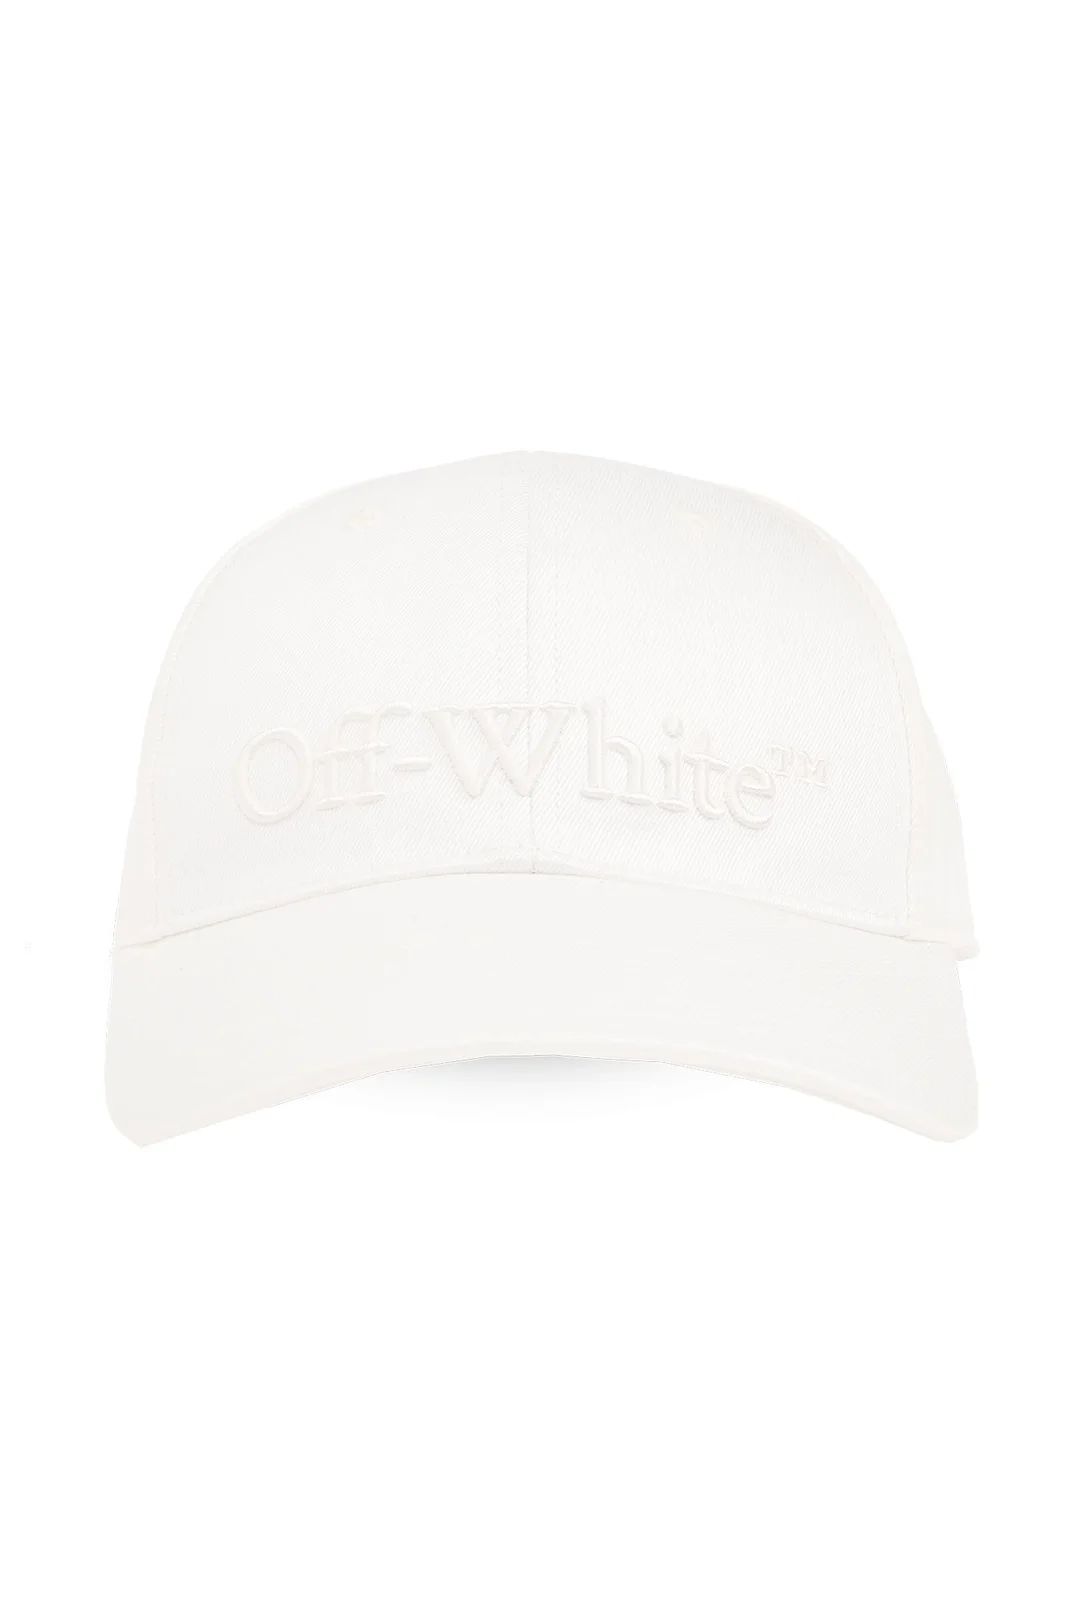 Off-White Logo Embroidered Baseball Cap | Cettire Global